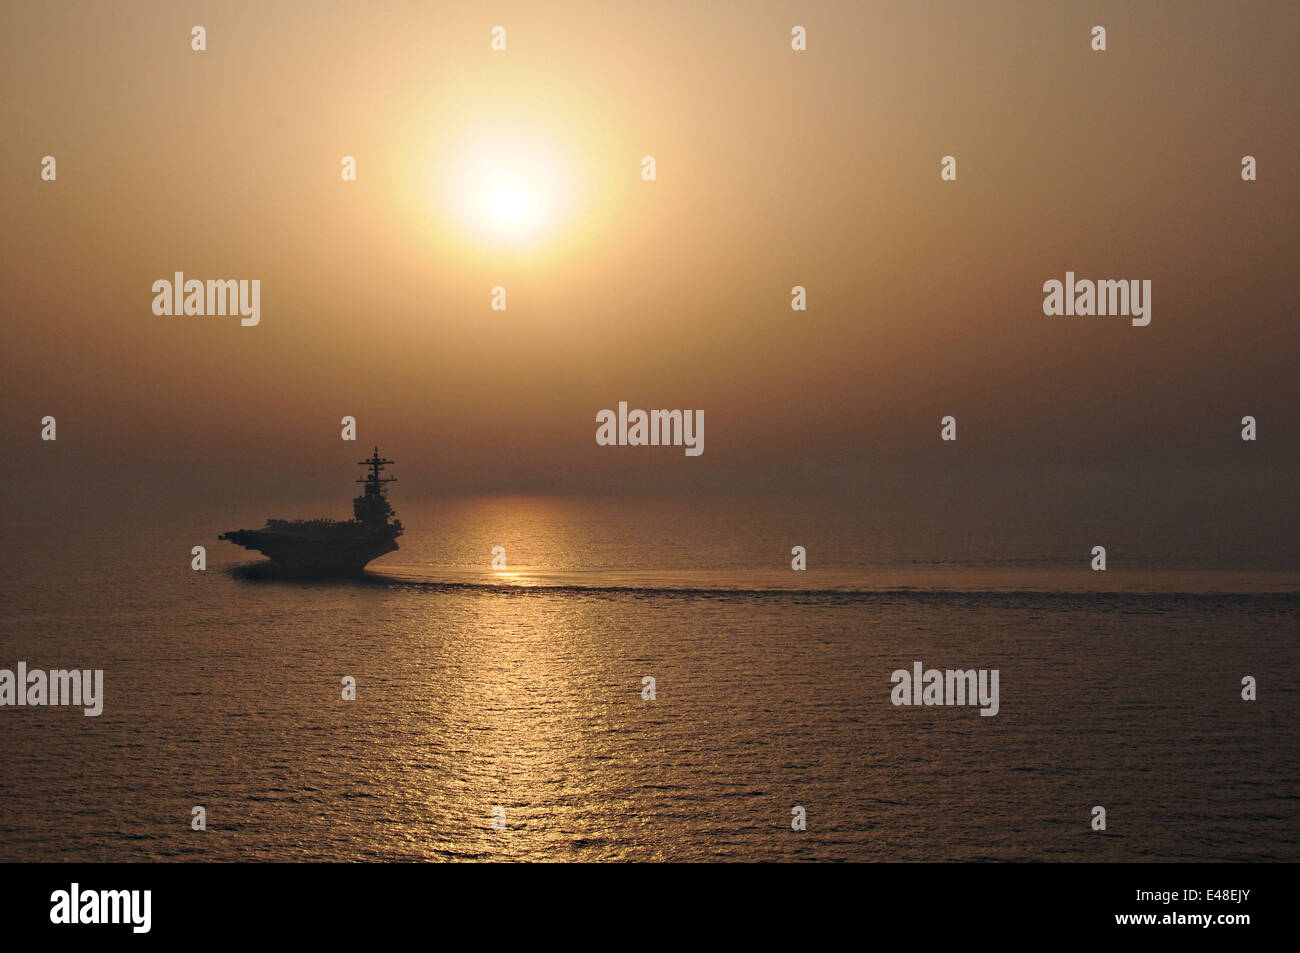 US Navy nuclear aircraft carrier USS George H.W. Bush during operations at sunset June 21, 2014 in the Persian Gulf. Stock Photo